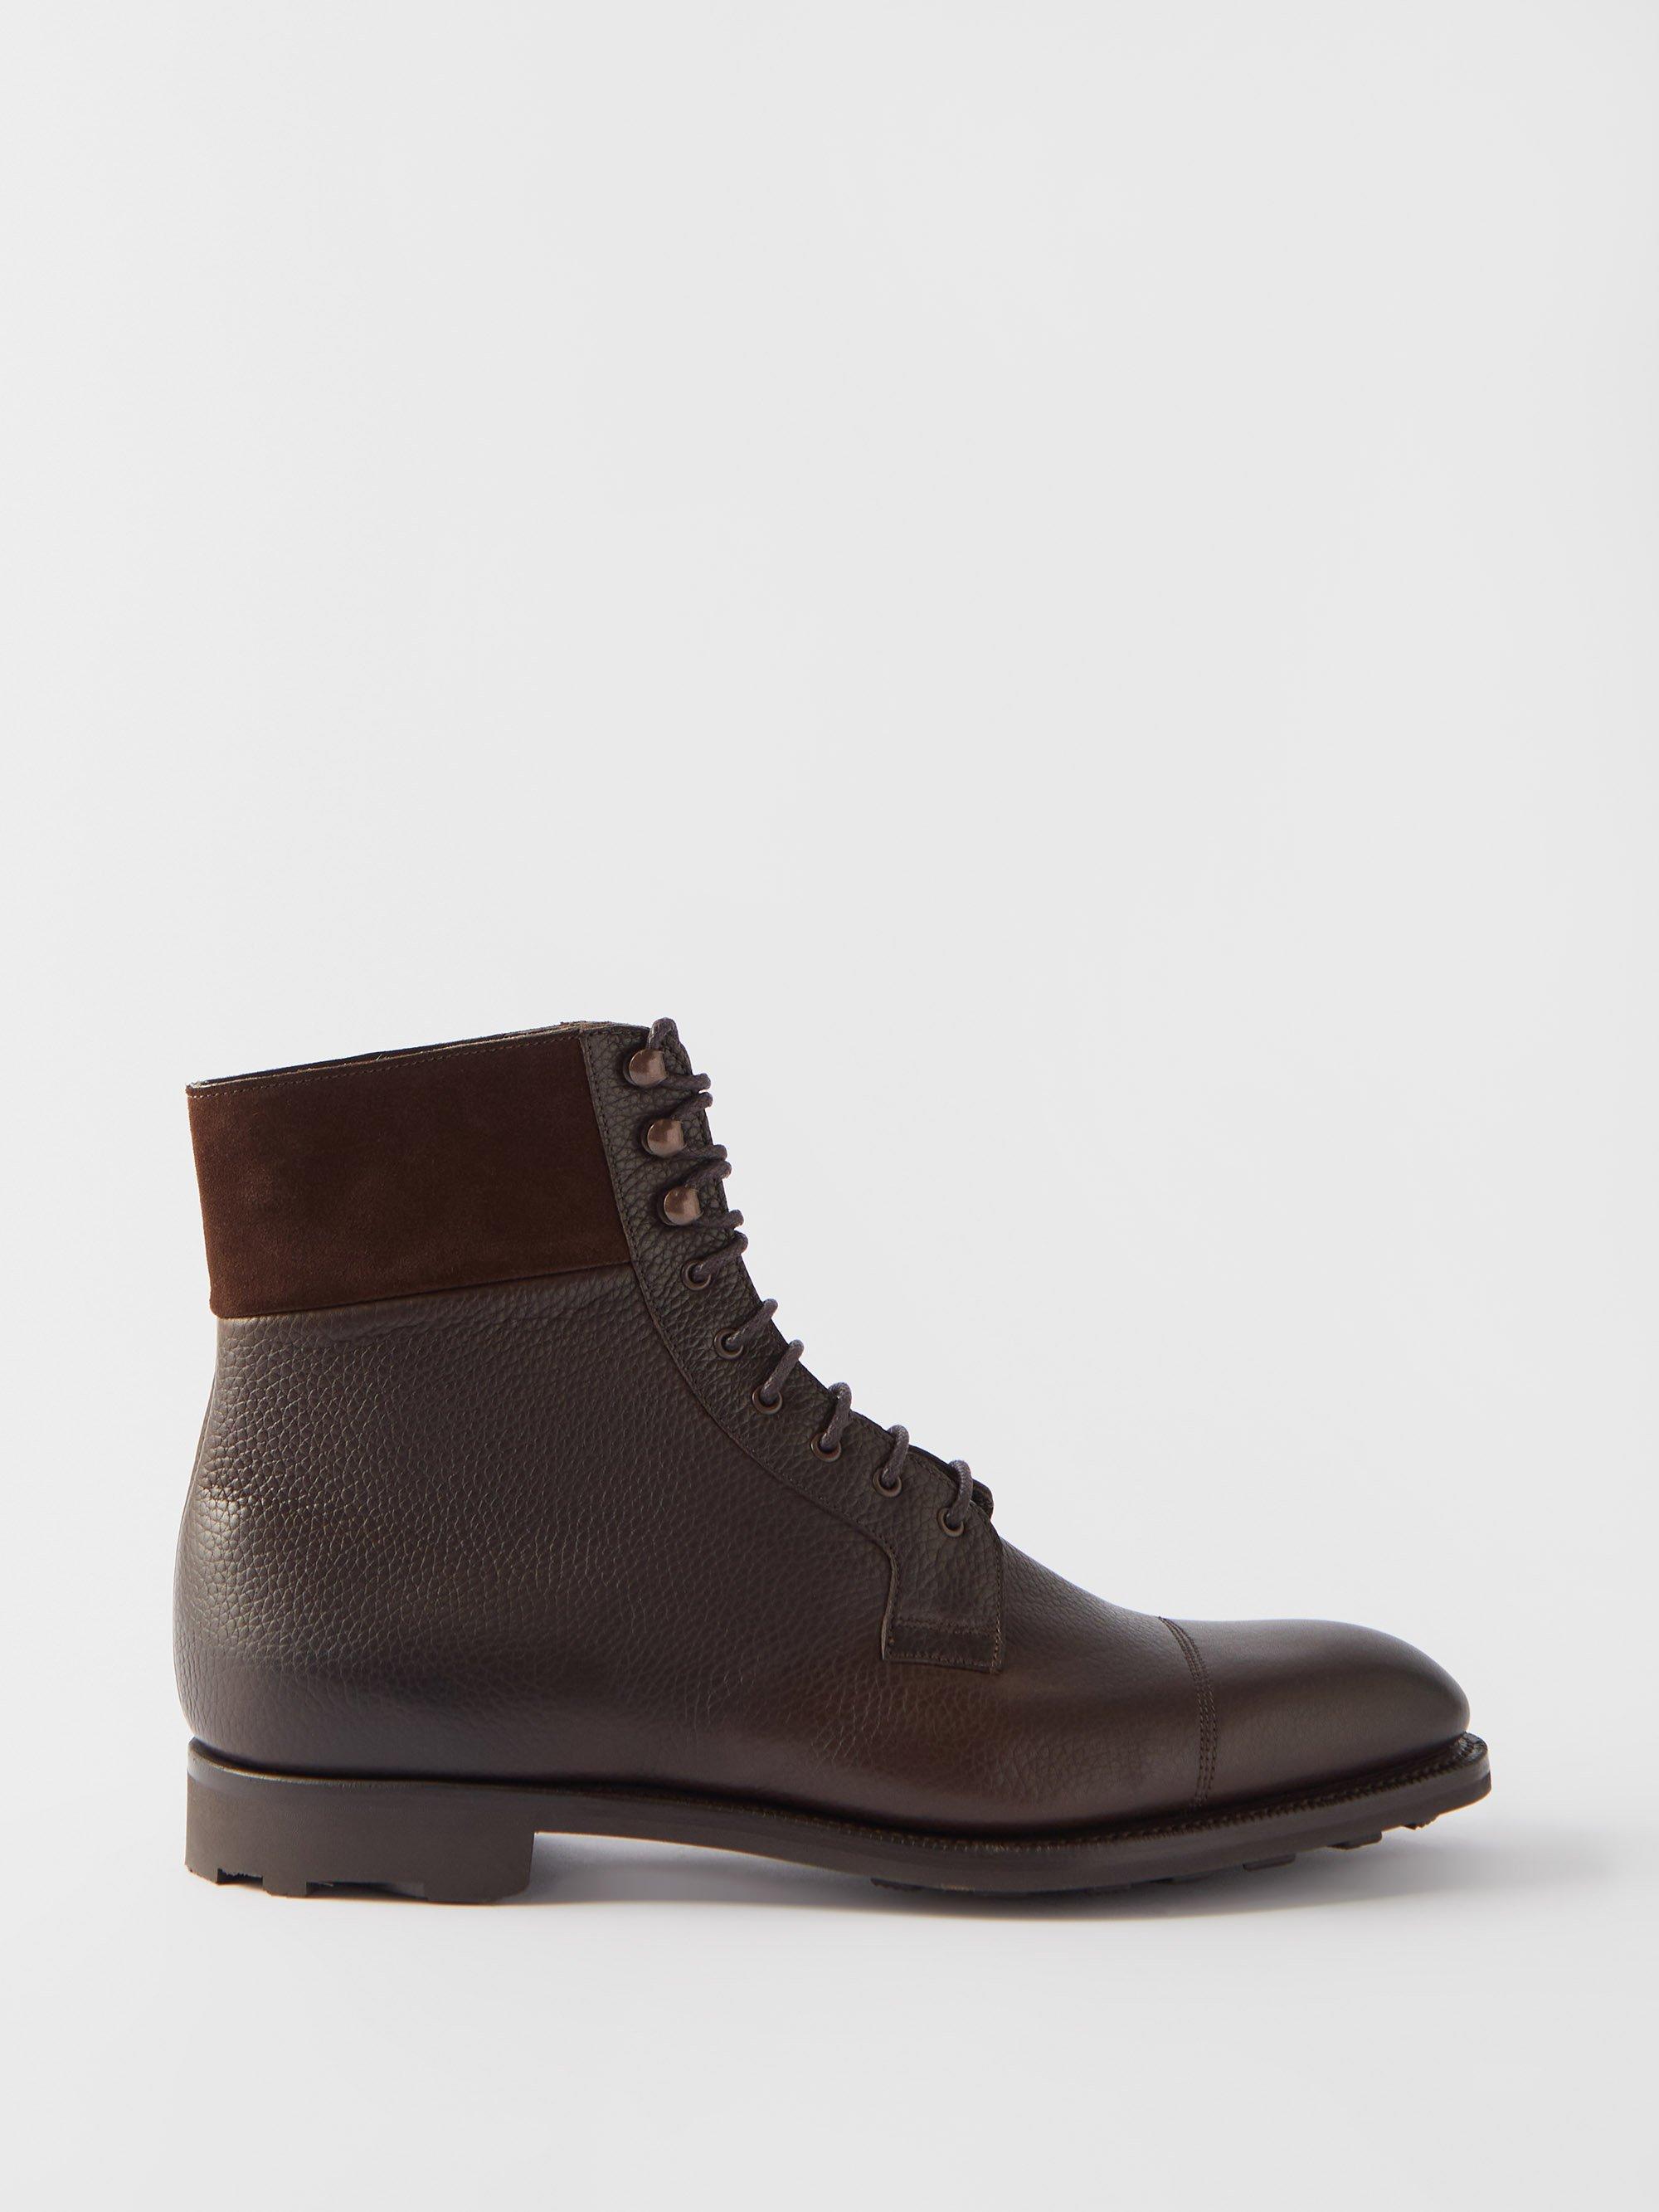 Edward Green Shetland Suede-trimmed Leather Boots in Brown for Men | Lyst